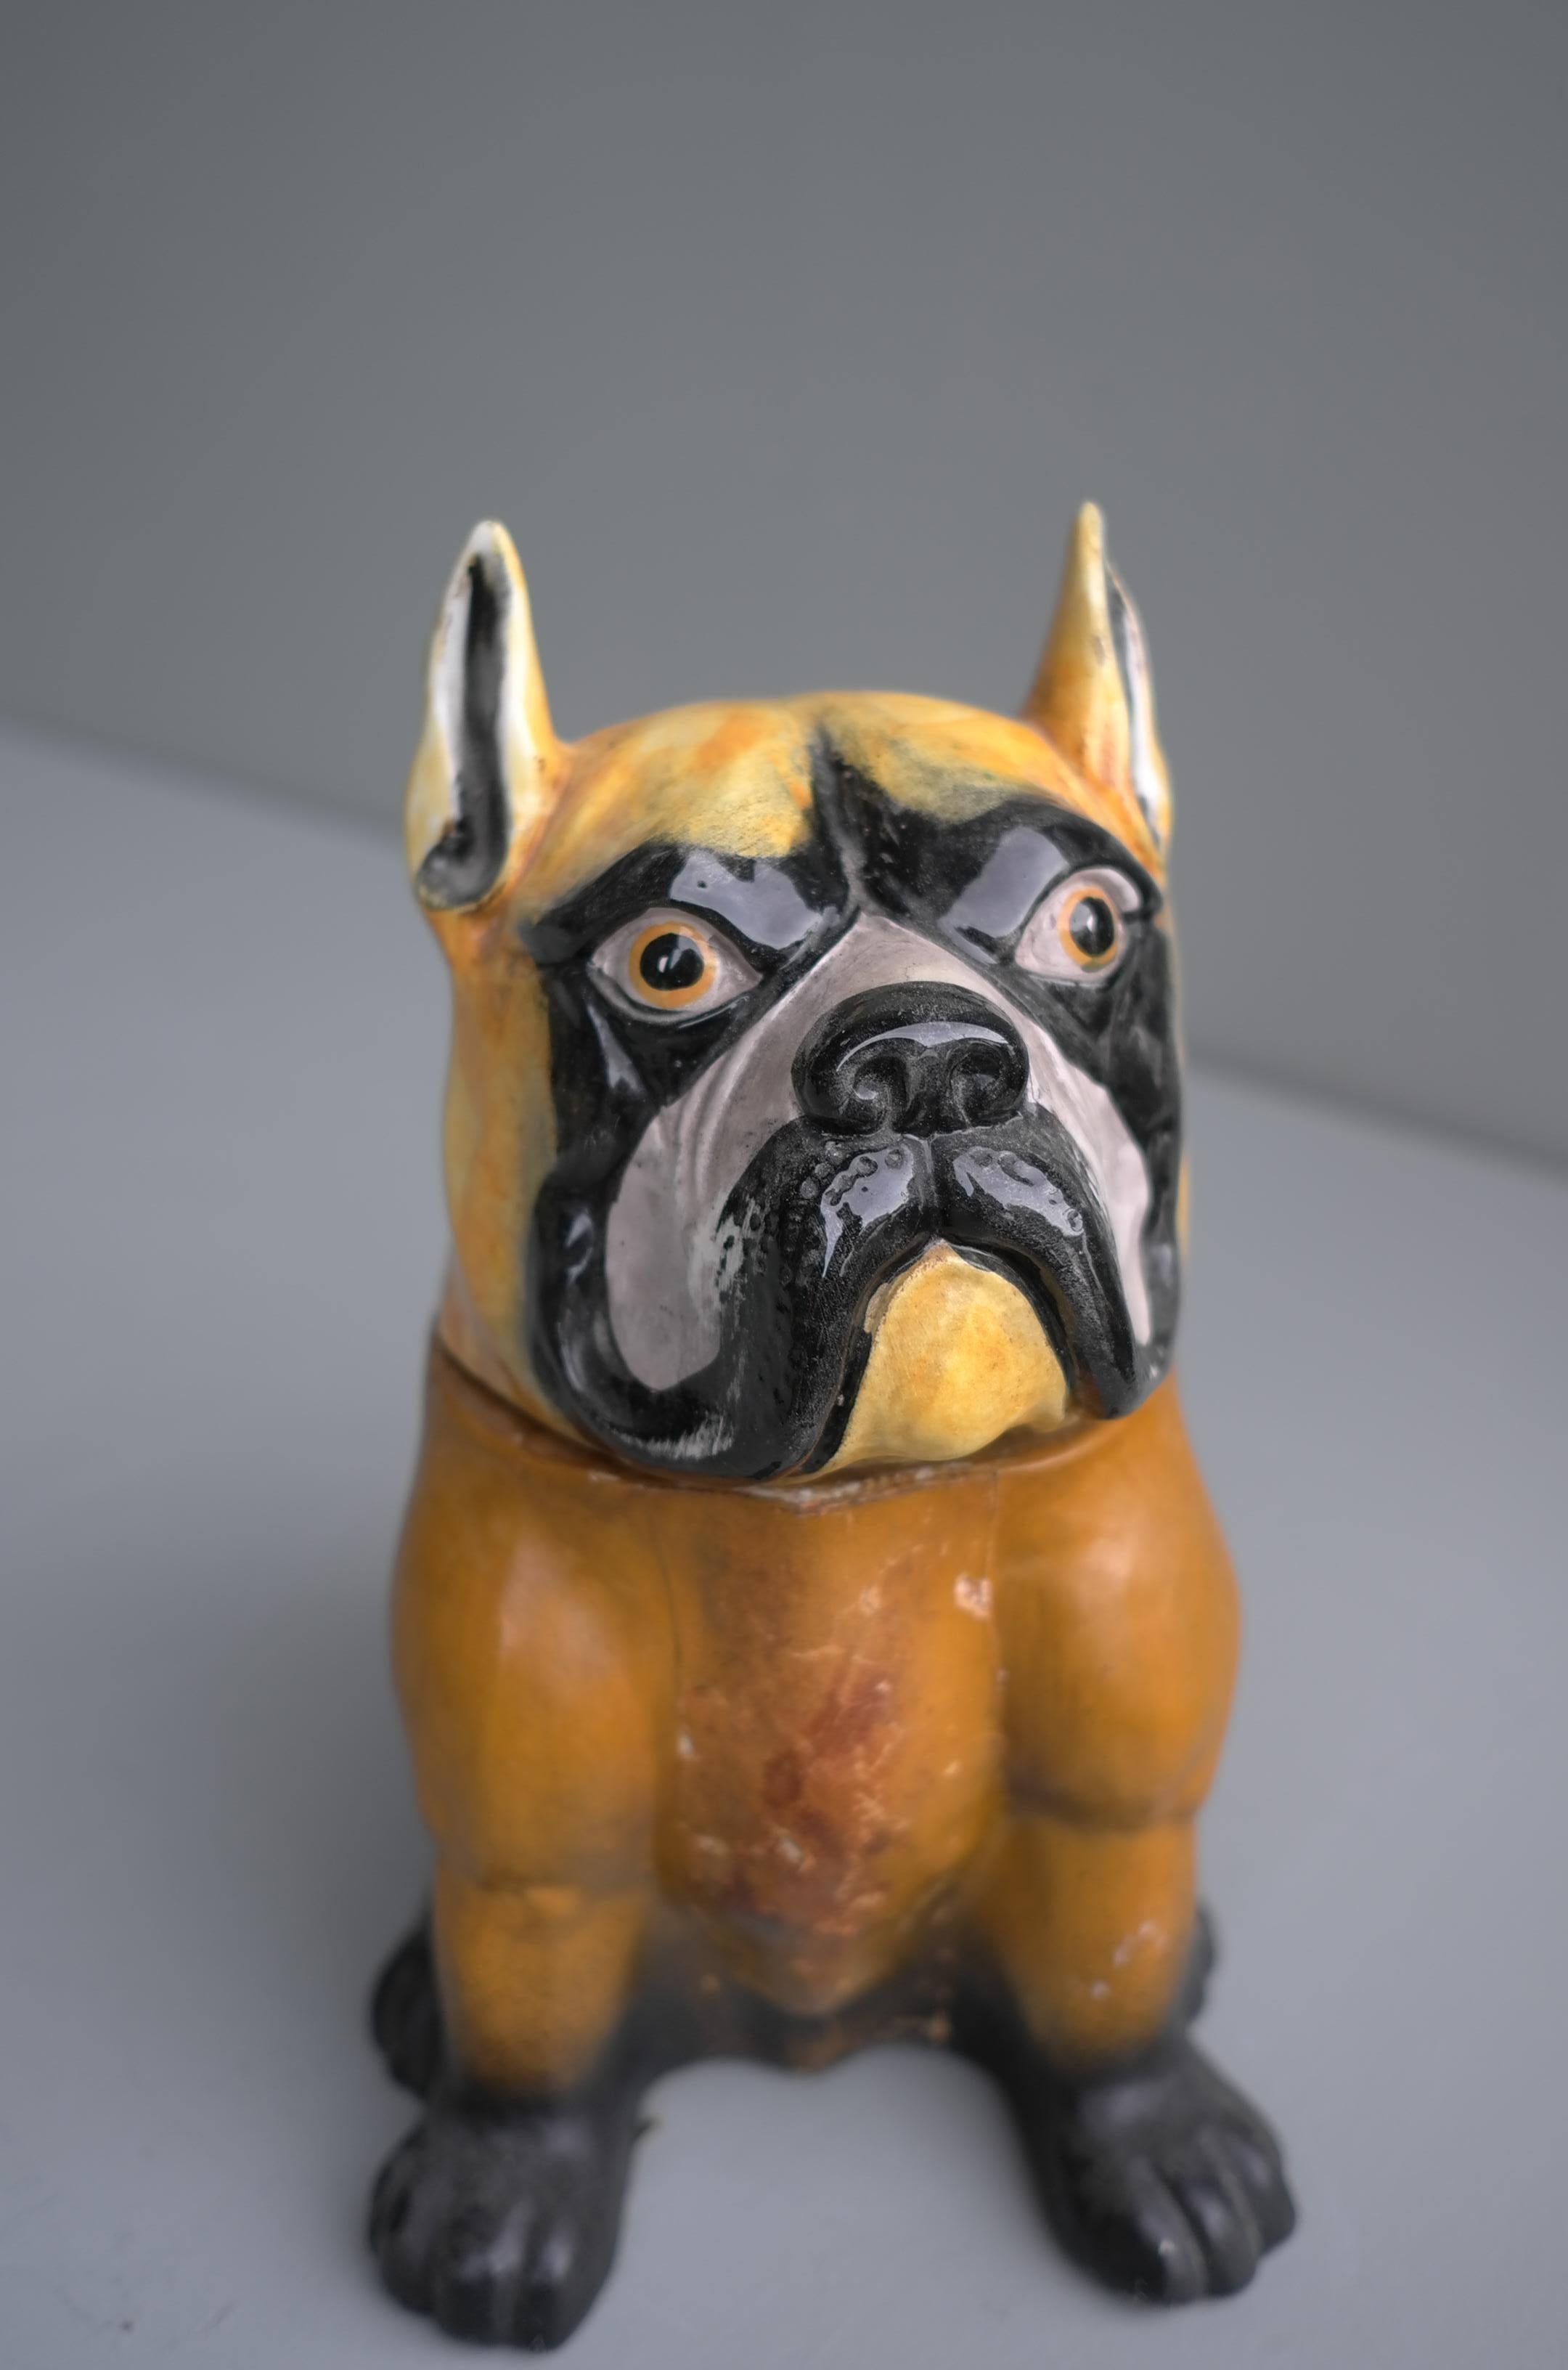 Decorative bulldog glazed ceramic and leather sculpture cookie jar, 1960s

The head is Ceramic glazed the body ceramic and leather with paint.
It can also function as Cookie Jar or storage small things.